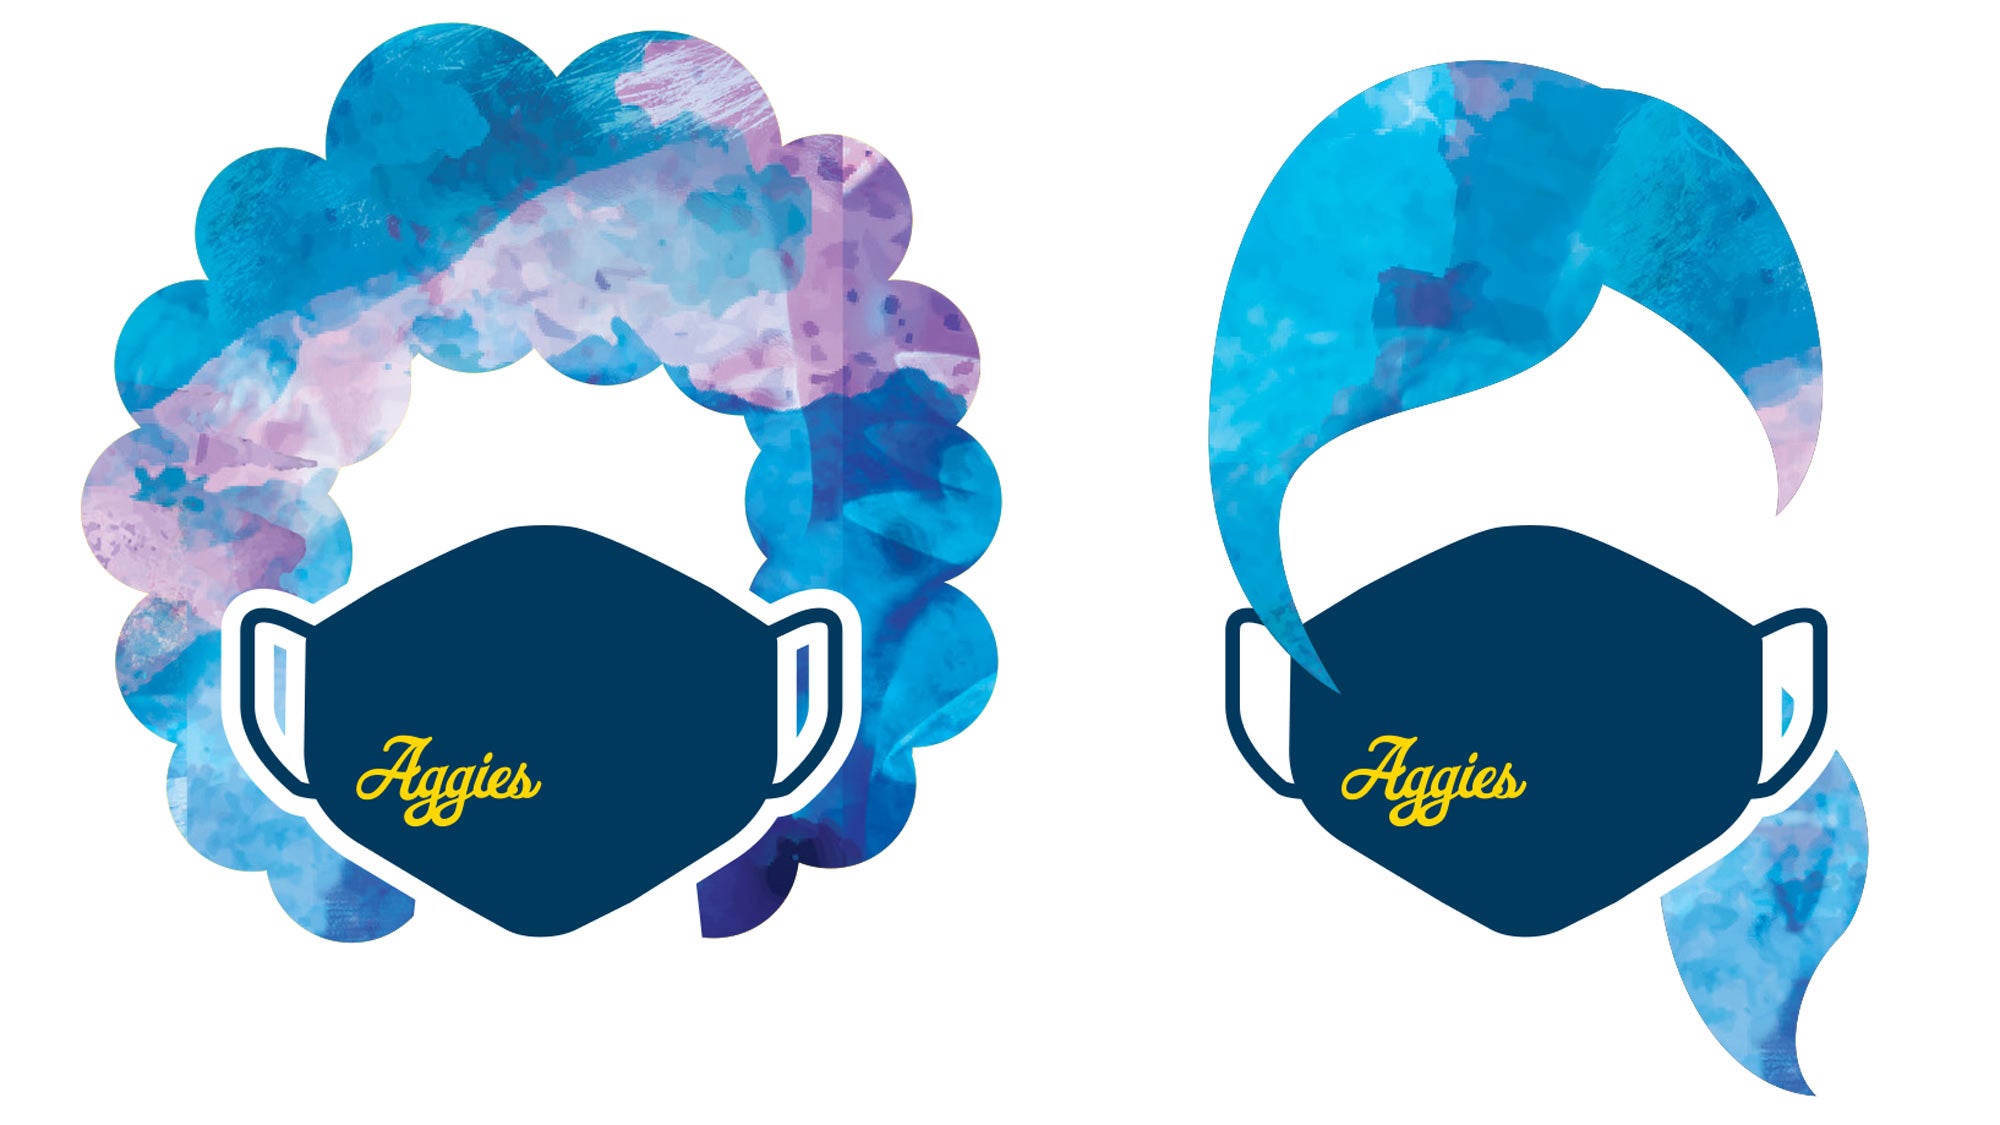 Drawings of two people wearing "Aggies" face masks.